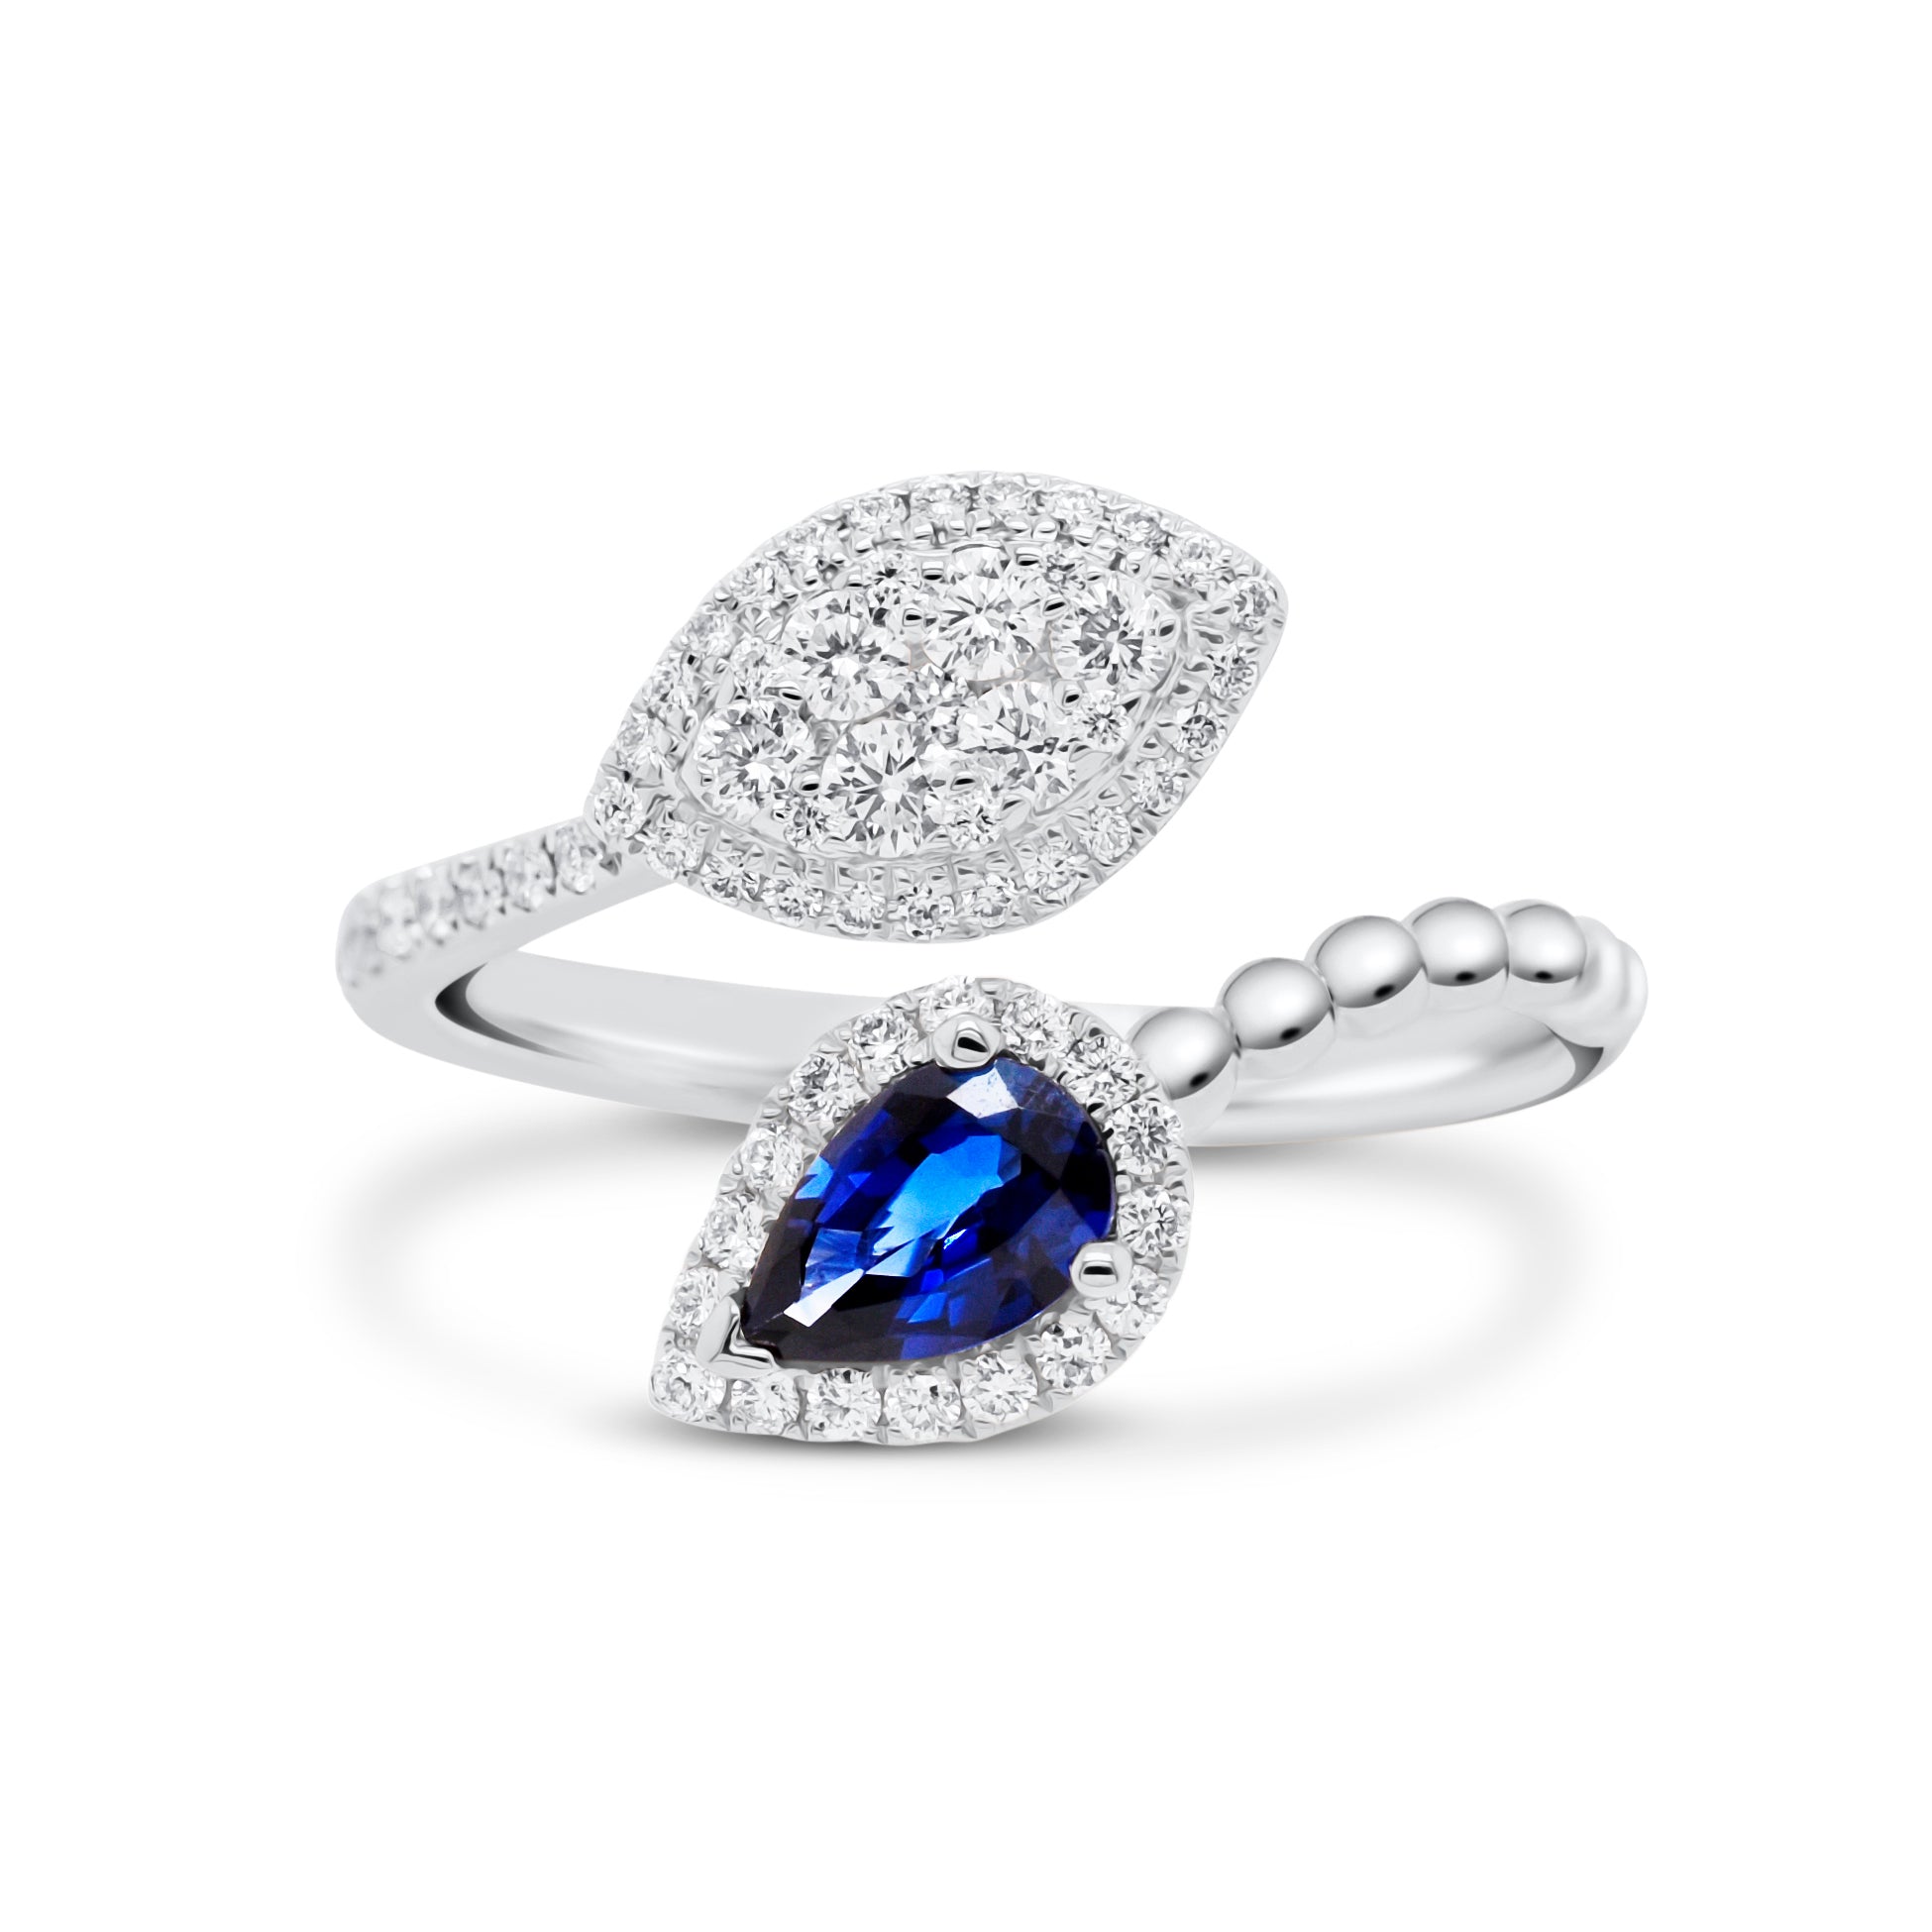 Sapphire teardrop and diamond marquise bypass ring - 18K gold weighing 2.97 grams  - 65 round diamonds totaling 0.40 carats  - 0.45 ct pear brilliant sapphire